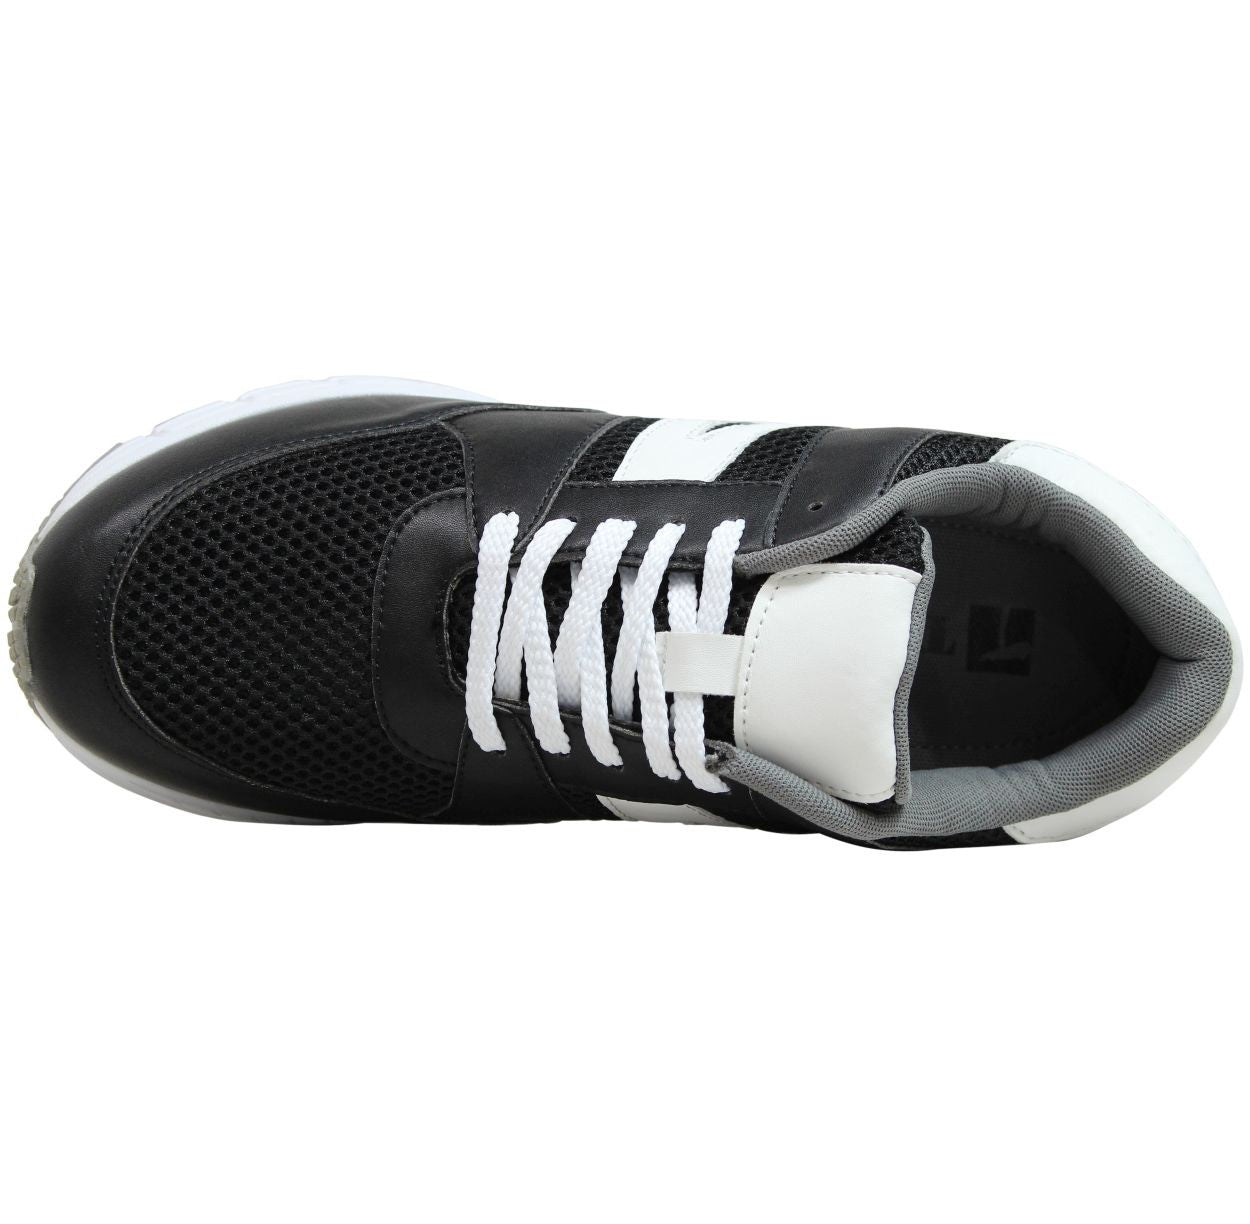 Elevator shoes height increase TOTO Black Lightweight Elevator Sneakers - 3.3 Inches - H2213